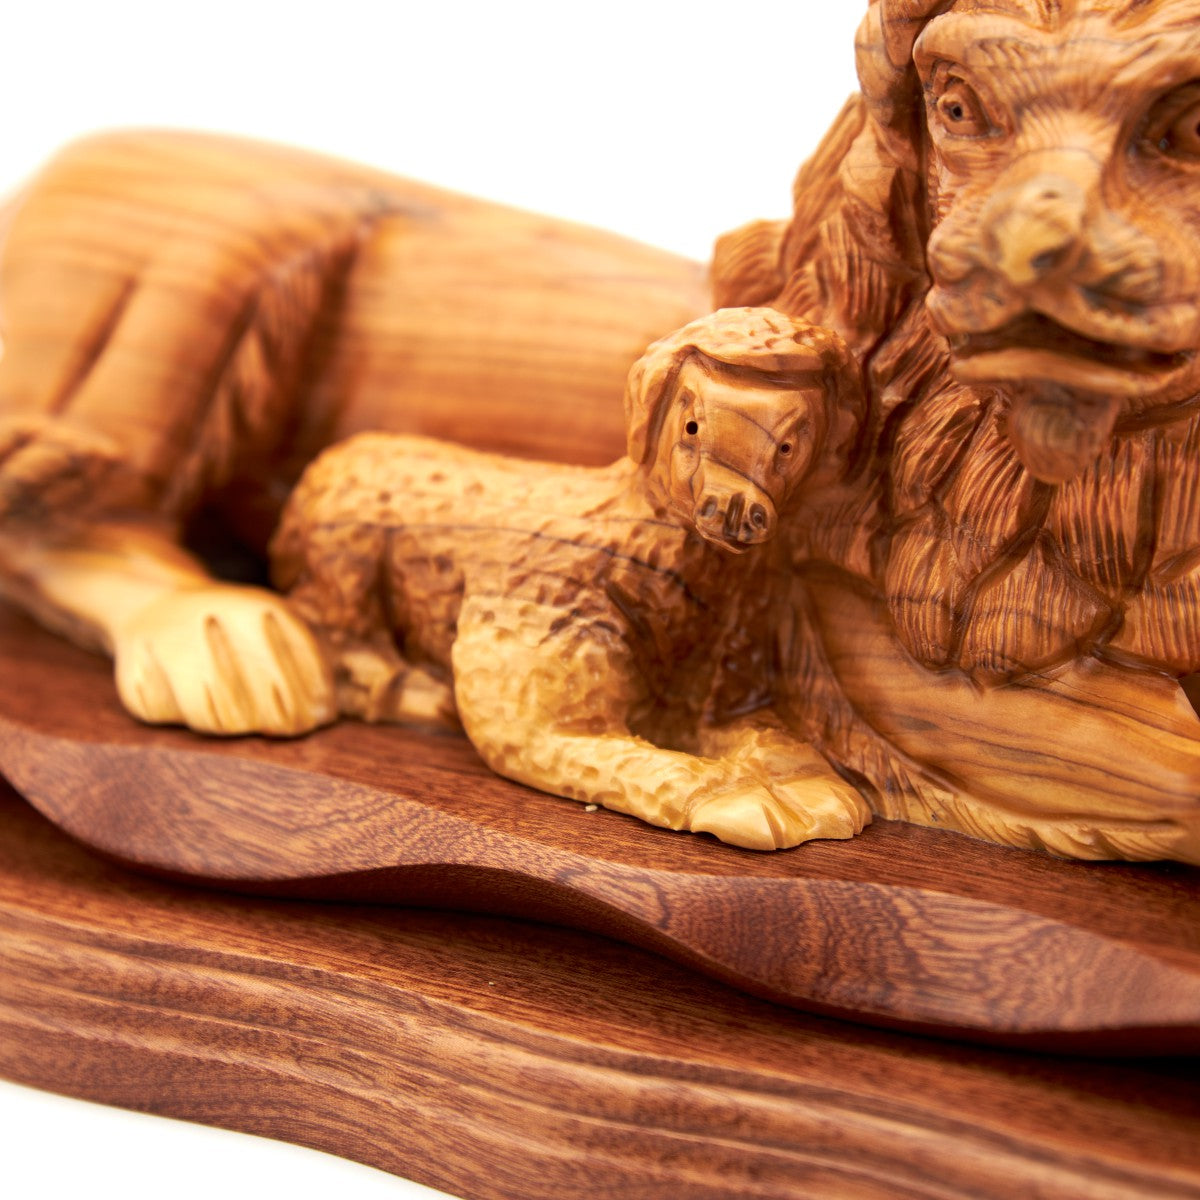 Lion with Lamb Sculpture Carved in Olive Wood, 14.2"